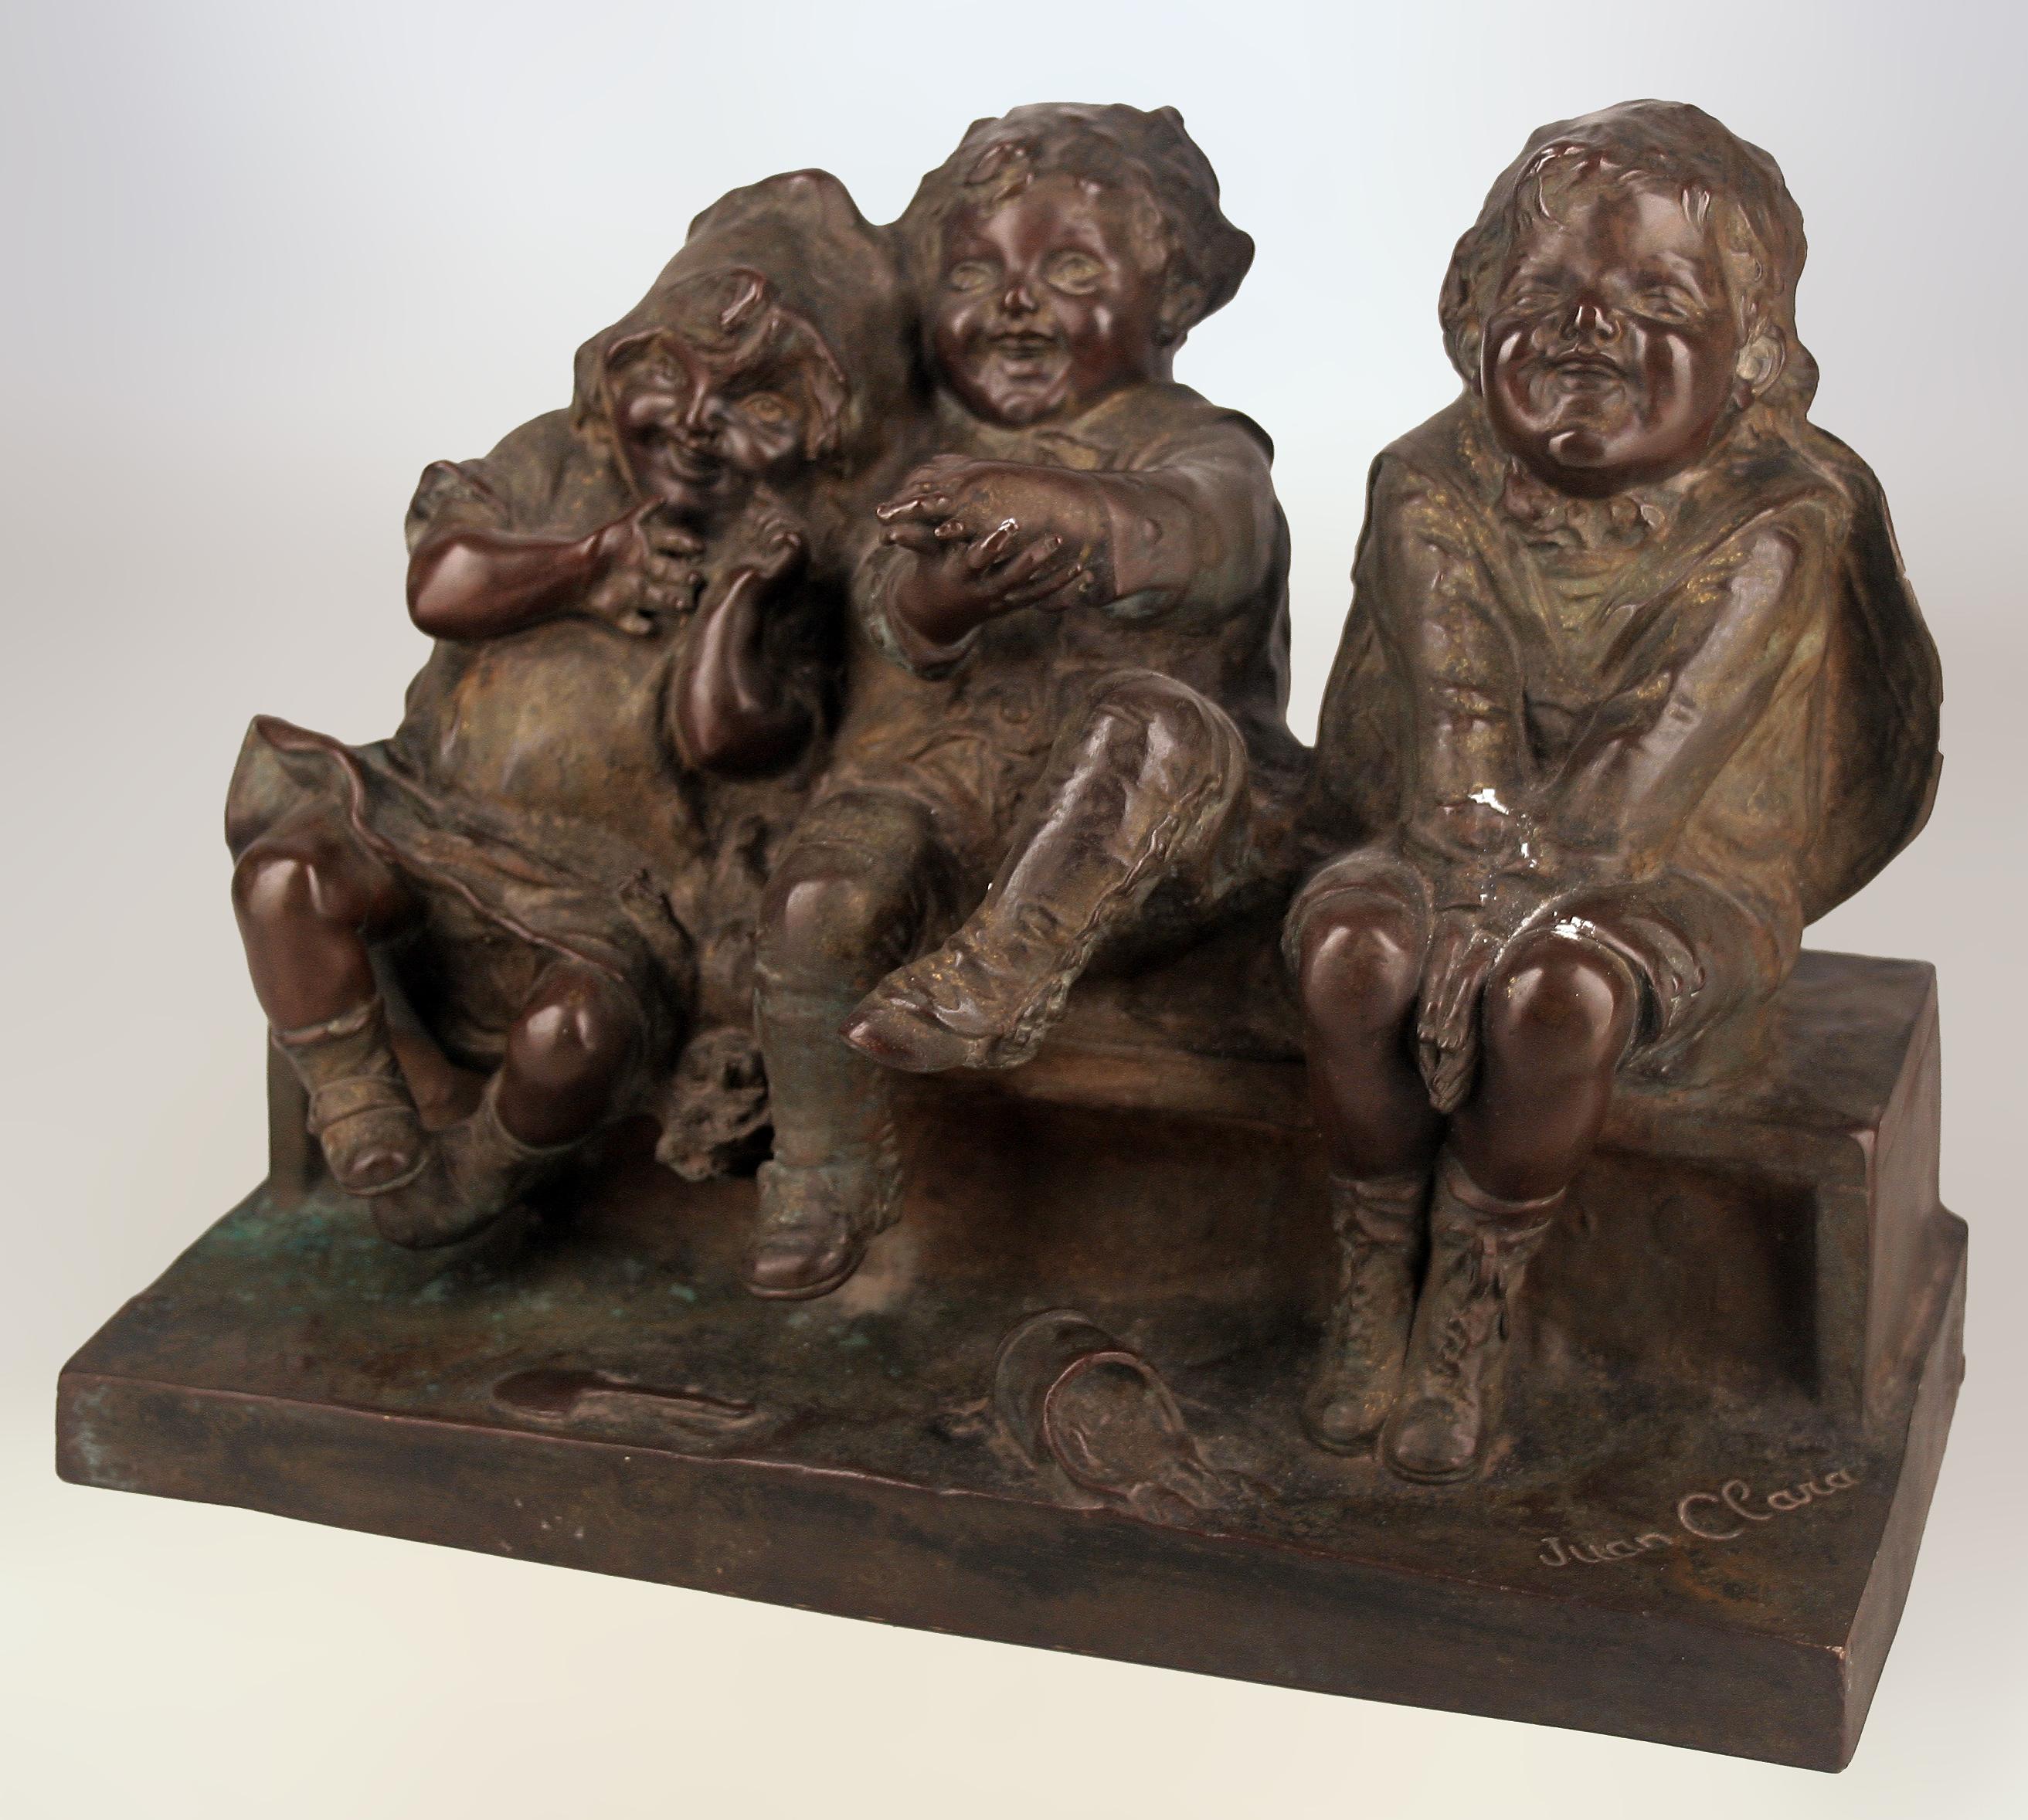 'Watching Something': patinated bronze sculpture of three children laughing and sitting on a bench by spanish artist Juan Clara

By: Juan Clara
Material: bronze, copper, metal
Technique: cast, patinated, carved, pressed, metalwork
Dimensions: 5.5 in